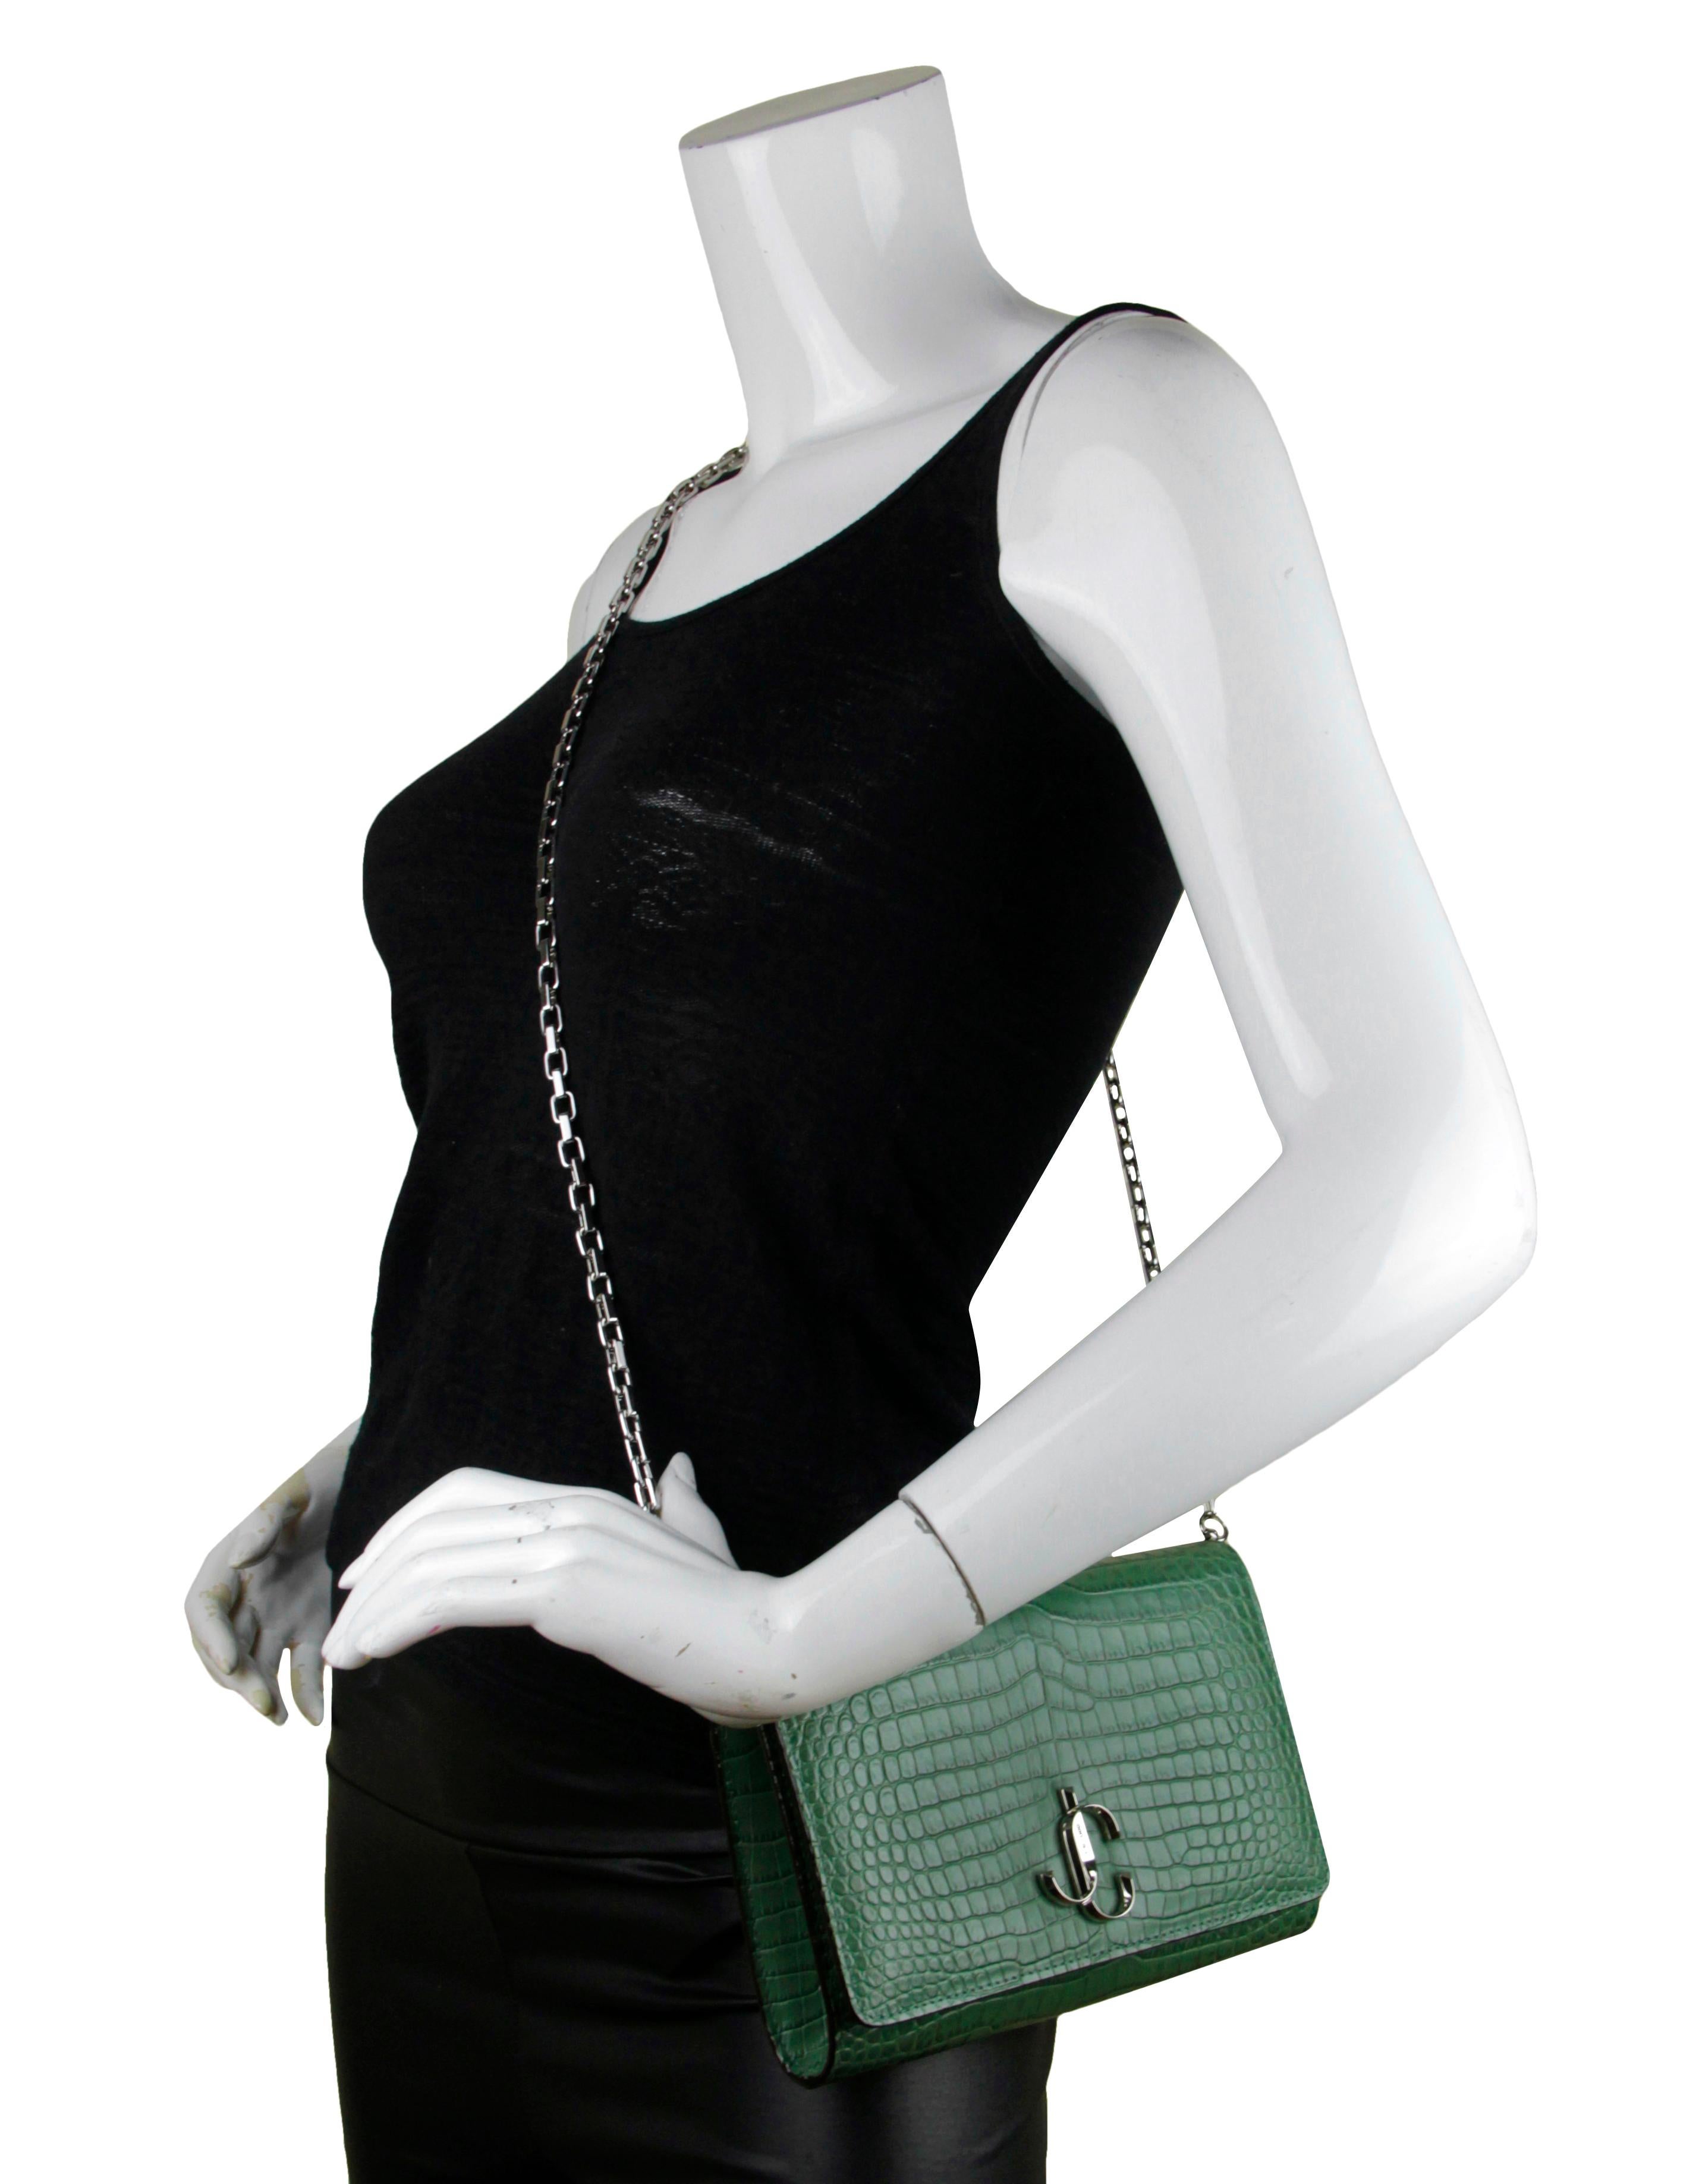 Jimmy Choo Cactus Green Embossed Crocodile Varenne Crossbody/ Clutch Bag 

Made In: Italy
Color: Cactus green
Hardware: Silvertone
Materials: Crocodile emboased leather
Lining: Satin
Closure/Opening: Flap with magnet
Exterior Pockets: Back